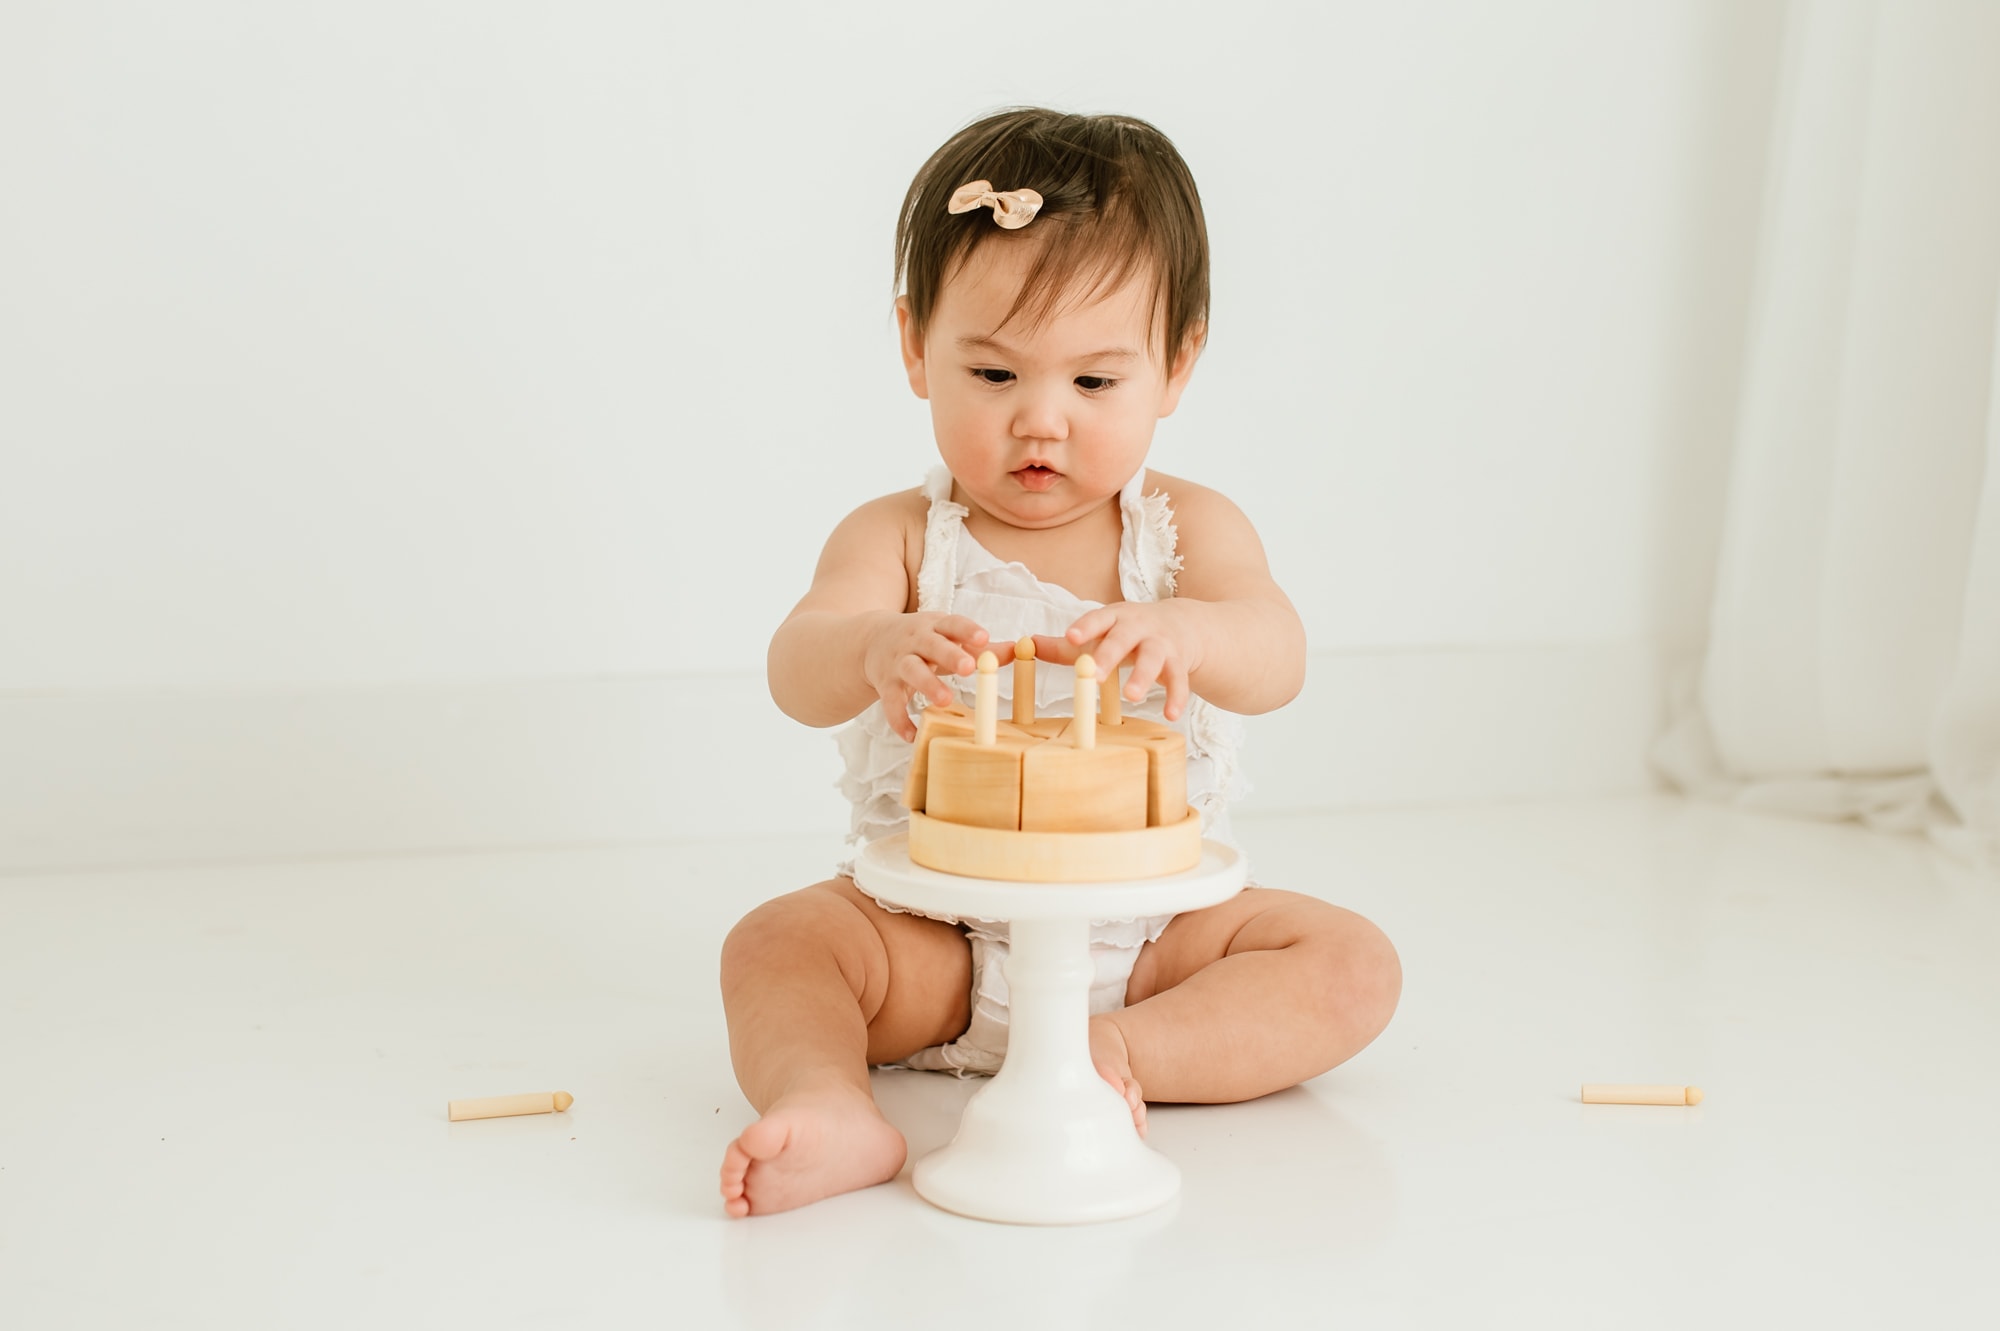 One year old girl plays with wooden cake toy to celebrate her first birthday with a portrait session.